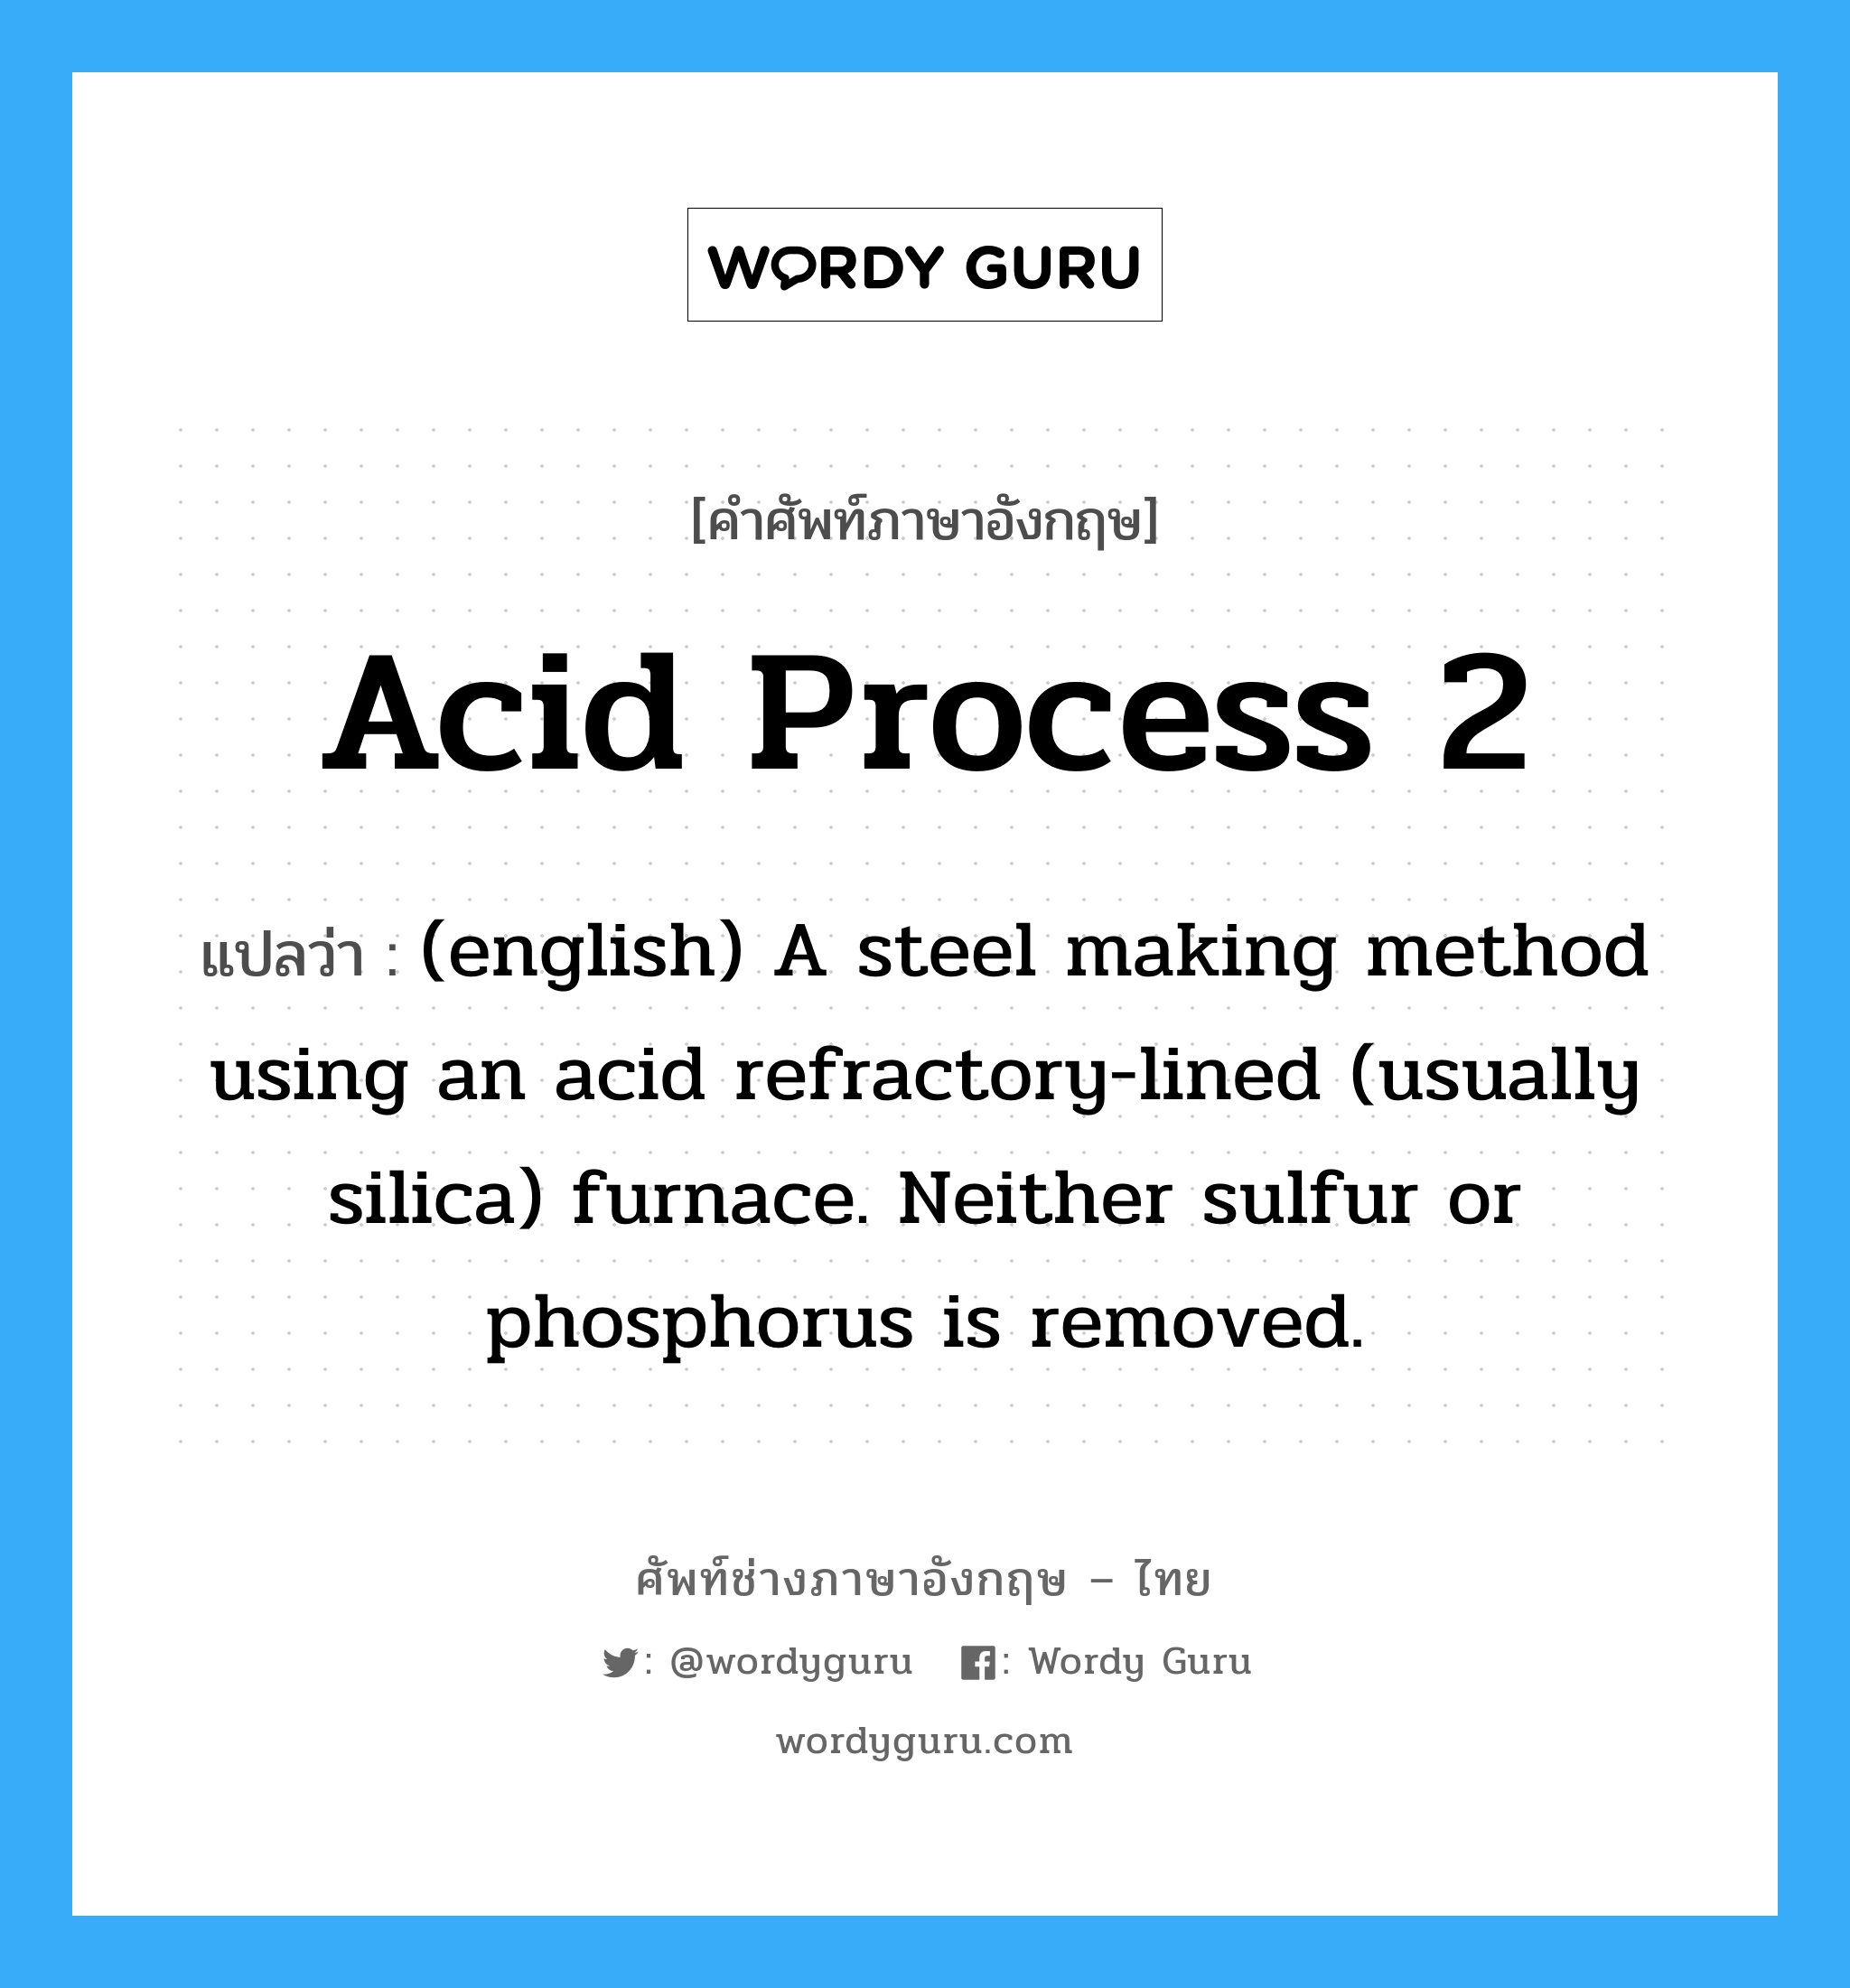 Acid Process 2 แปลว่า?, คำศัพท์ช่างภาษาอังกฤษ - ไทย Acid Process 2 คำศัพท์ภาษาอังกฤษ Acid Process 2 แปลว่า (english) A steel making method using an acid refractory-lined (usually silica) furnace. Neither sulfur or phosphorus is removed.